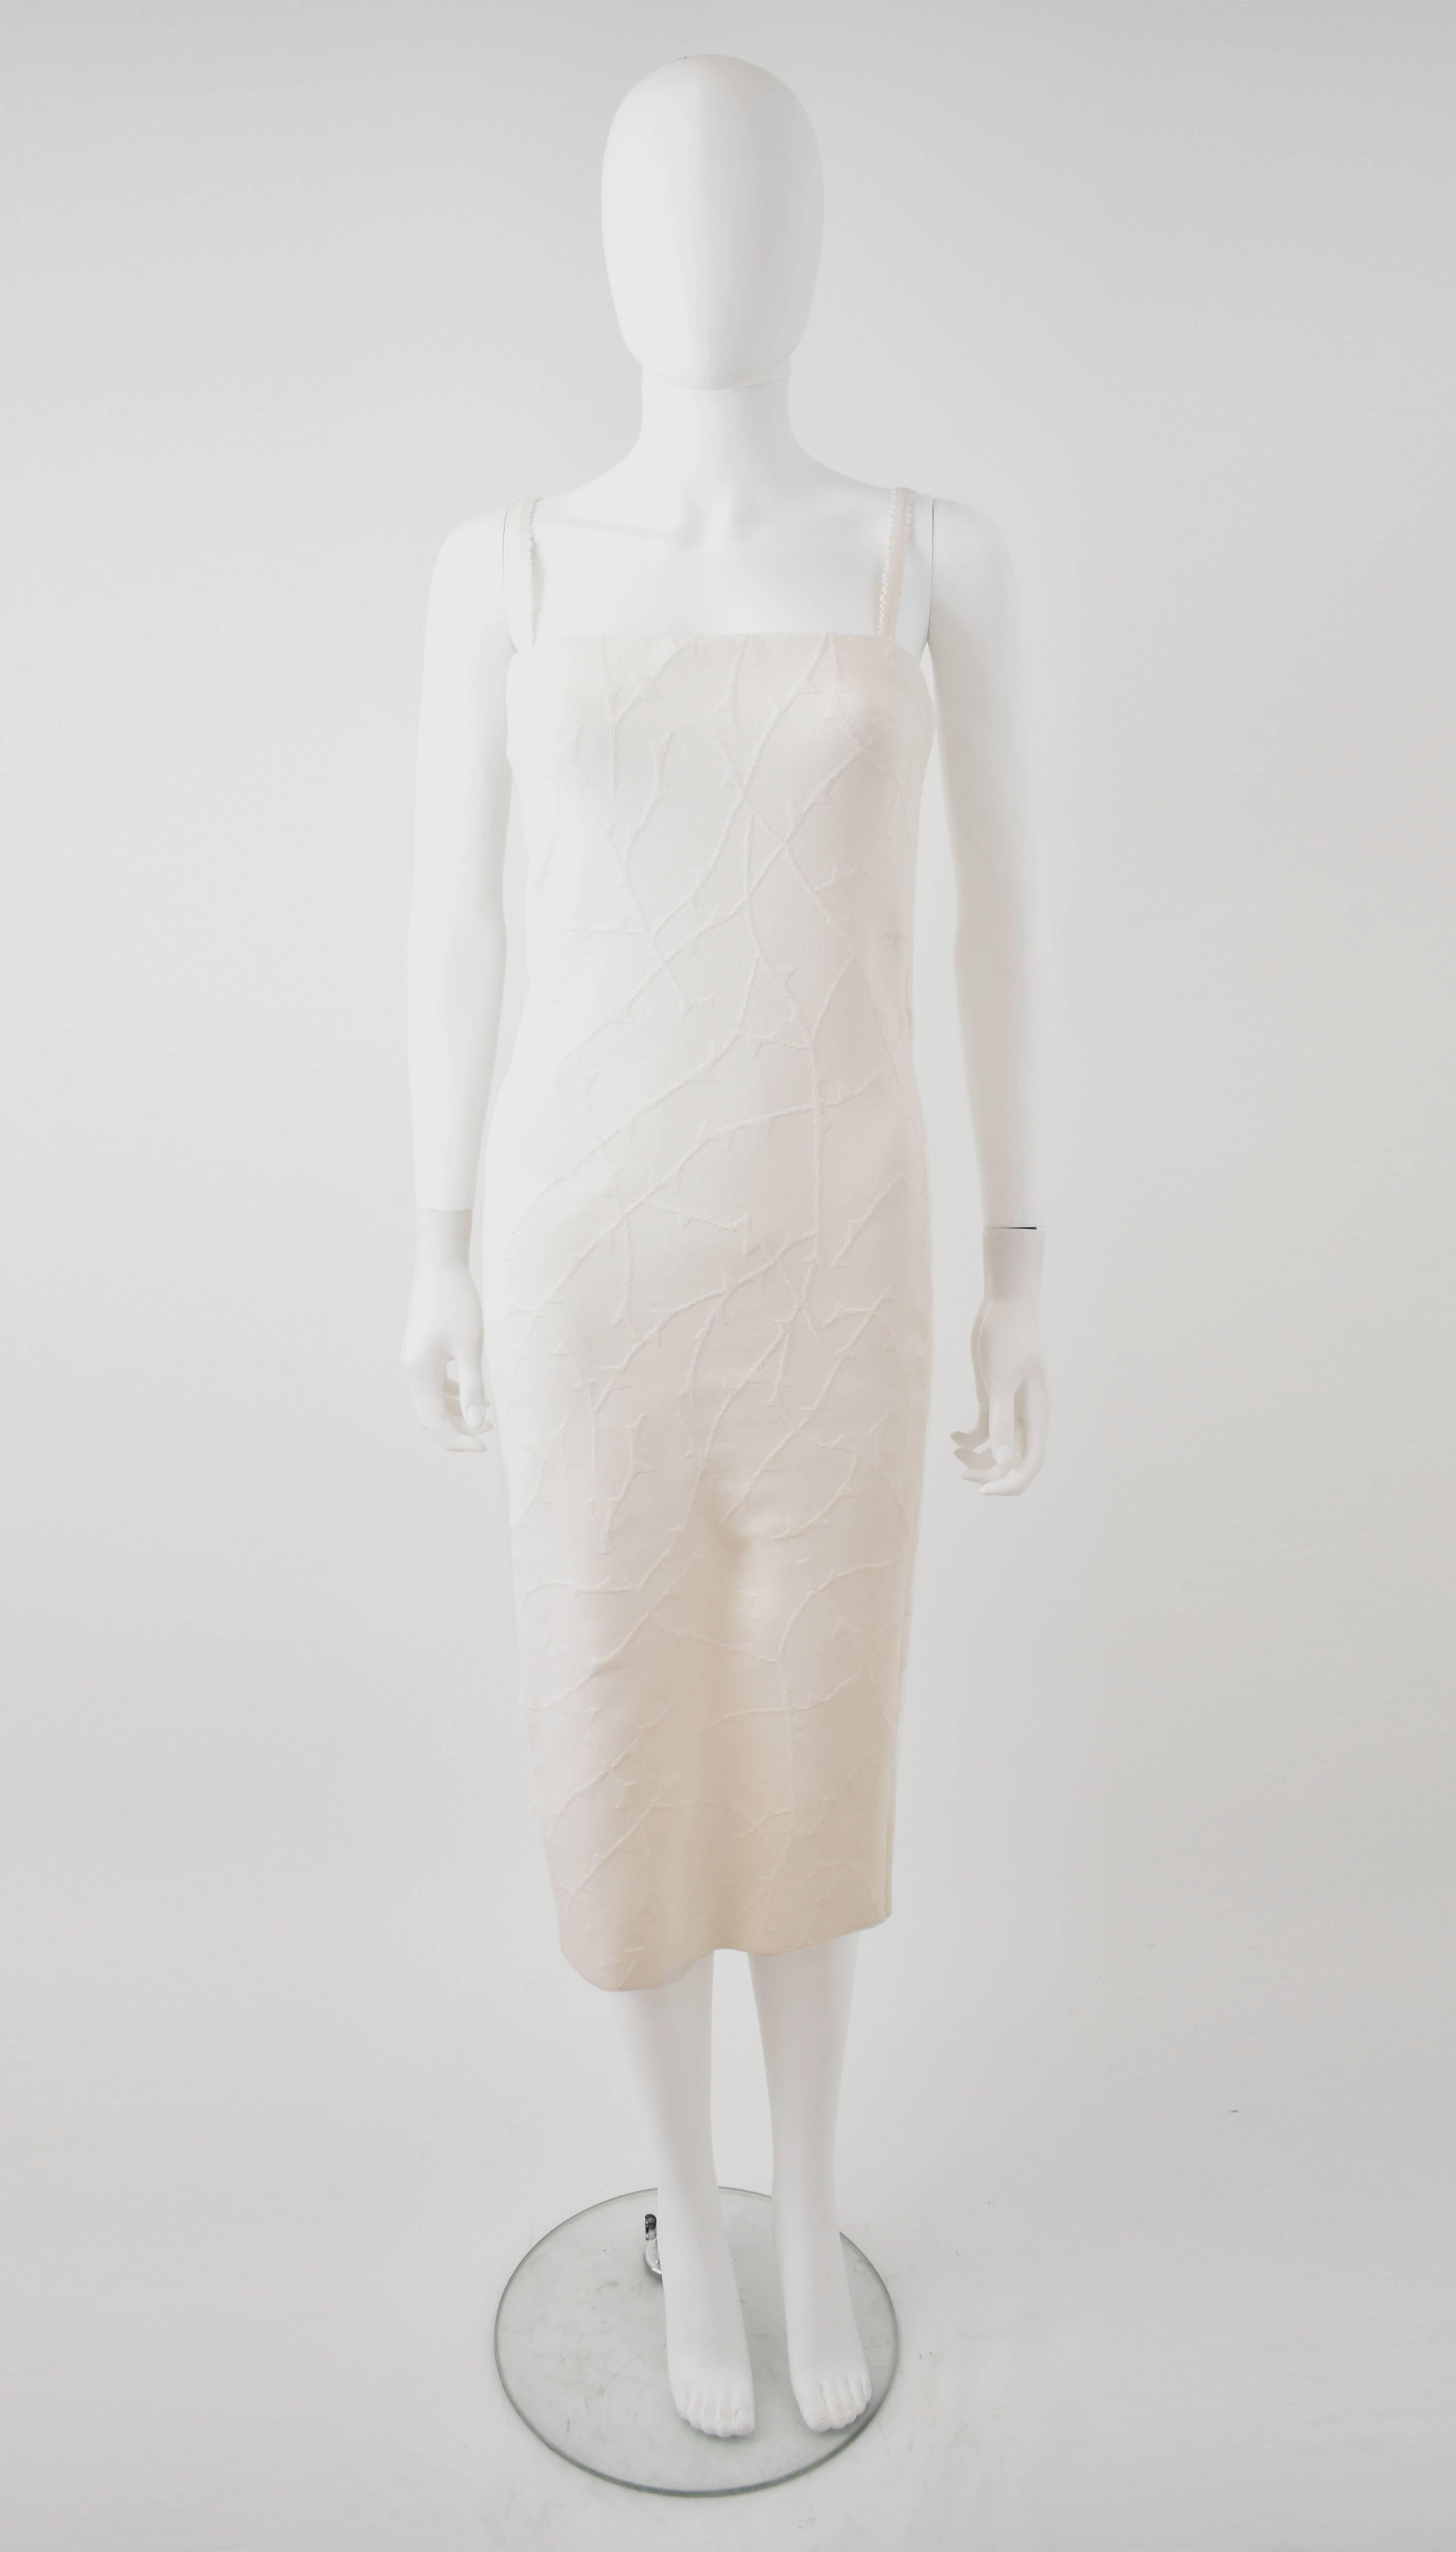 A white bodycon dress with an all-over Barbed Wire textured motif from the Spring/Summer 2010 Yves Saint Laurent collection designed by Stefano Pilati. The dress has a simple, sheath shape that fits close to the body with two thin shoulder straps